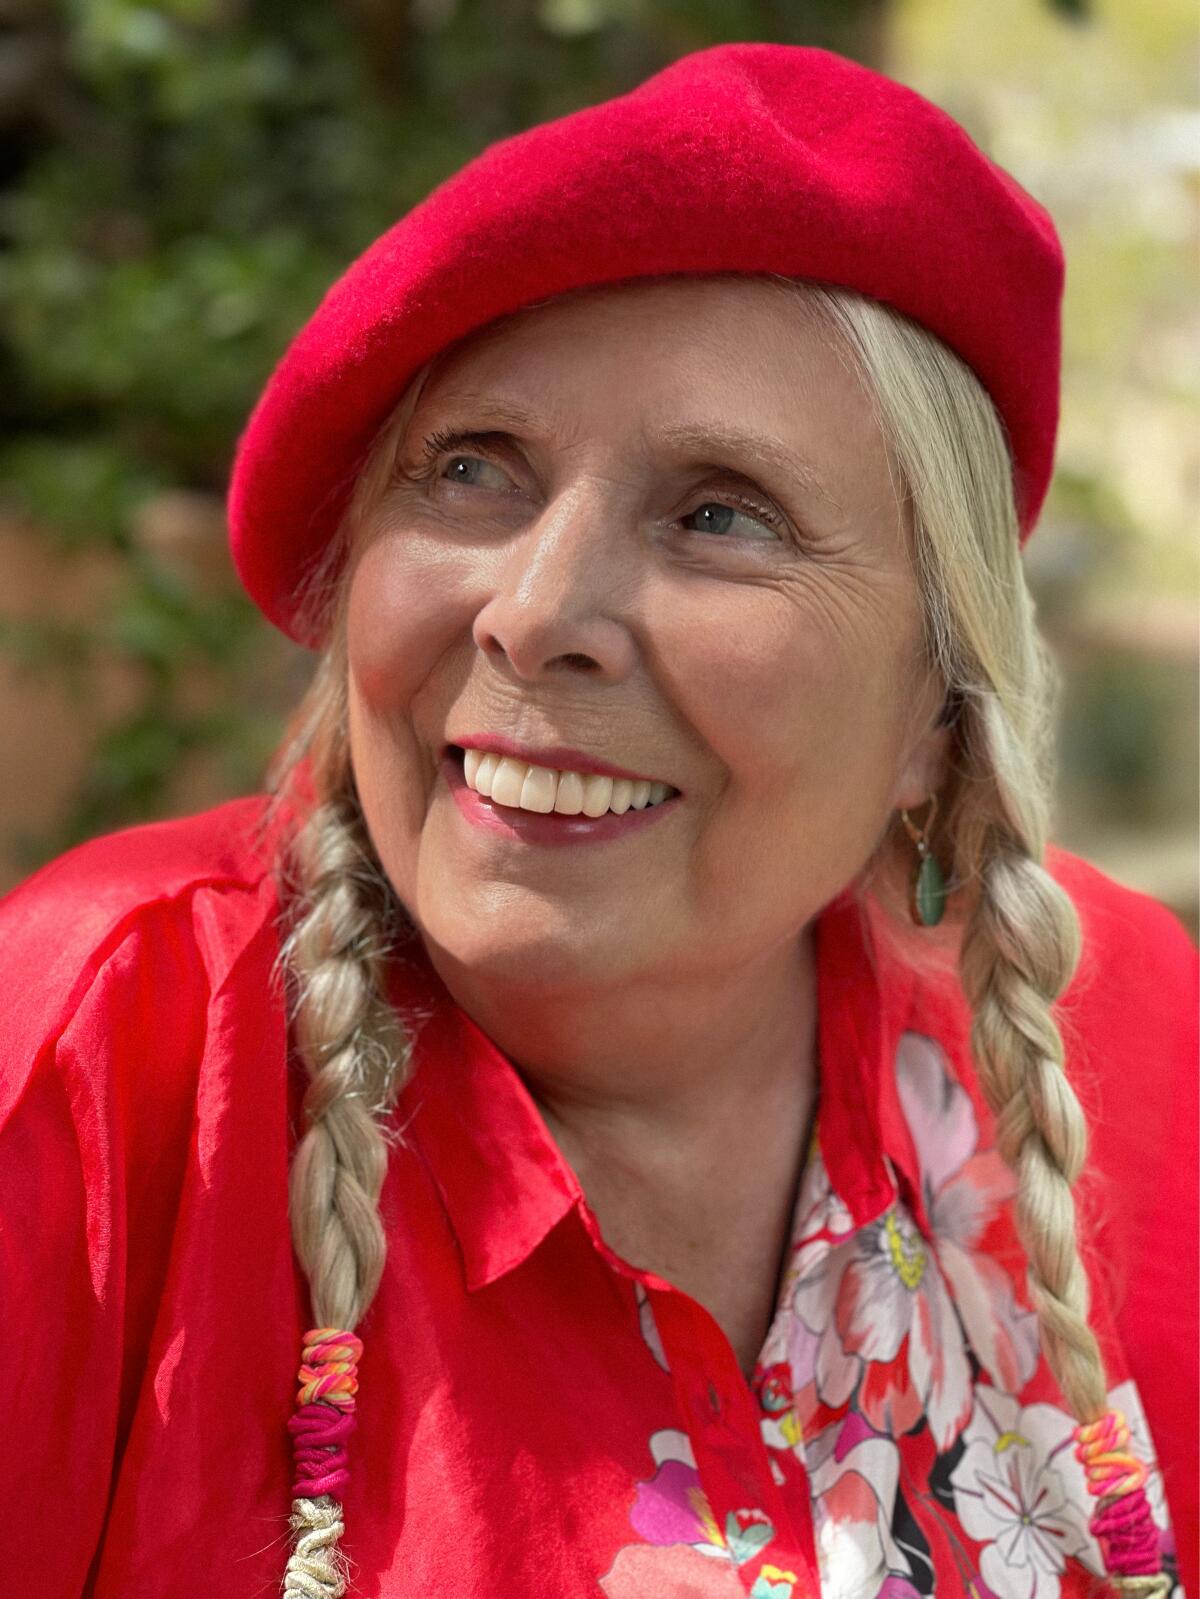 A woman in a red beret and braids